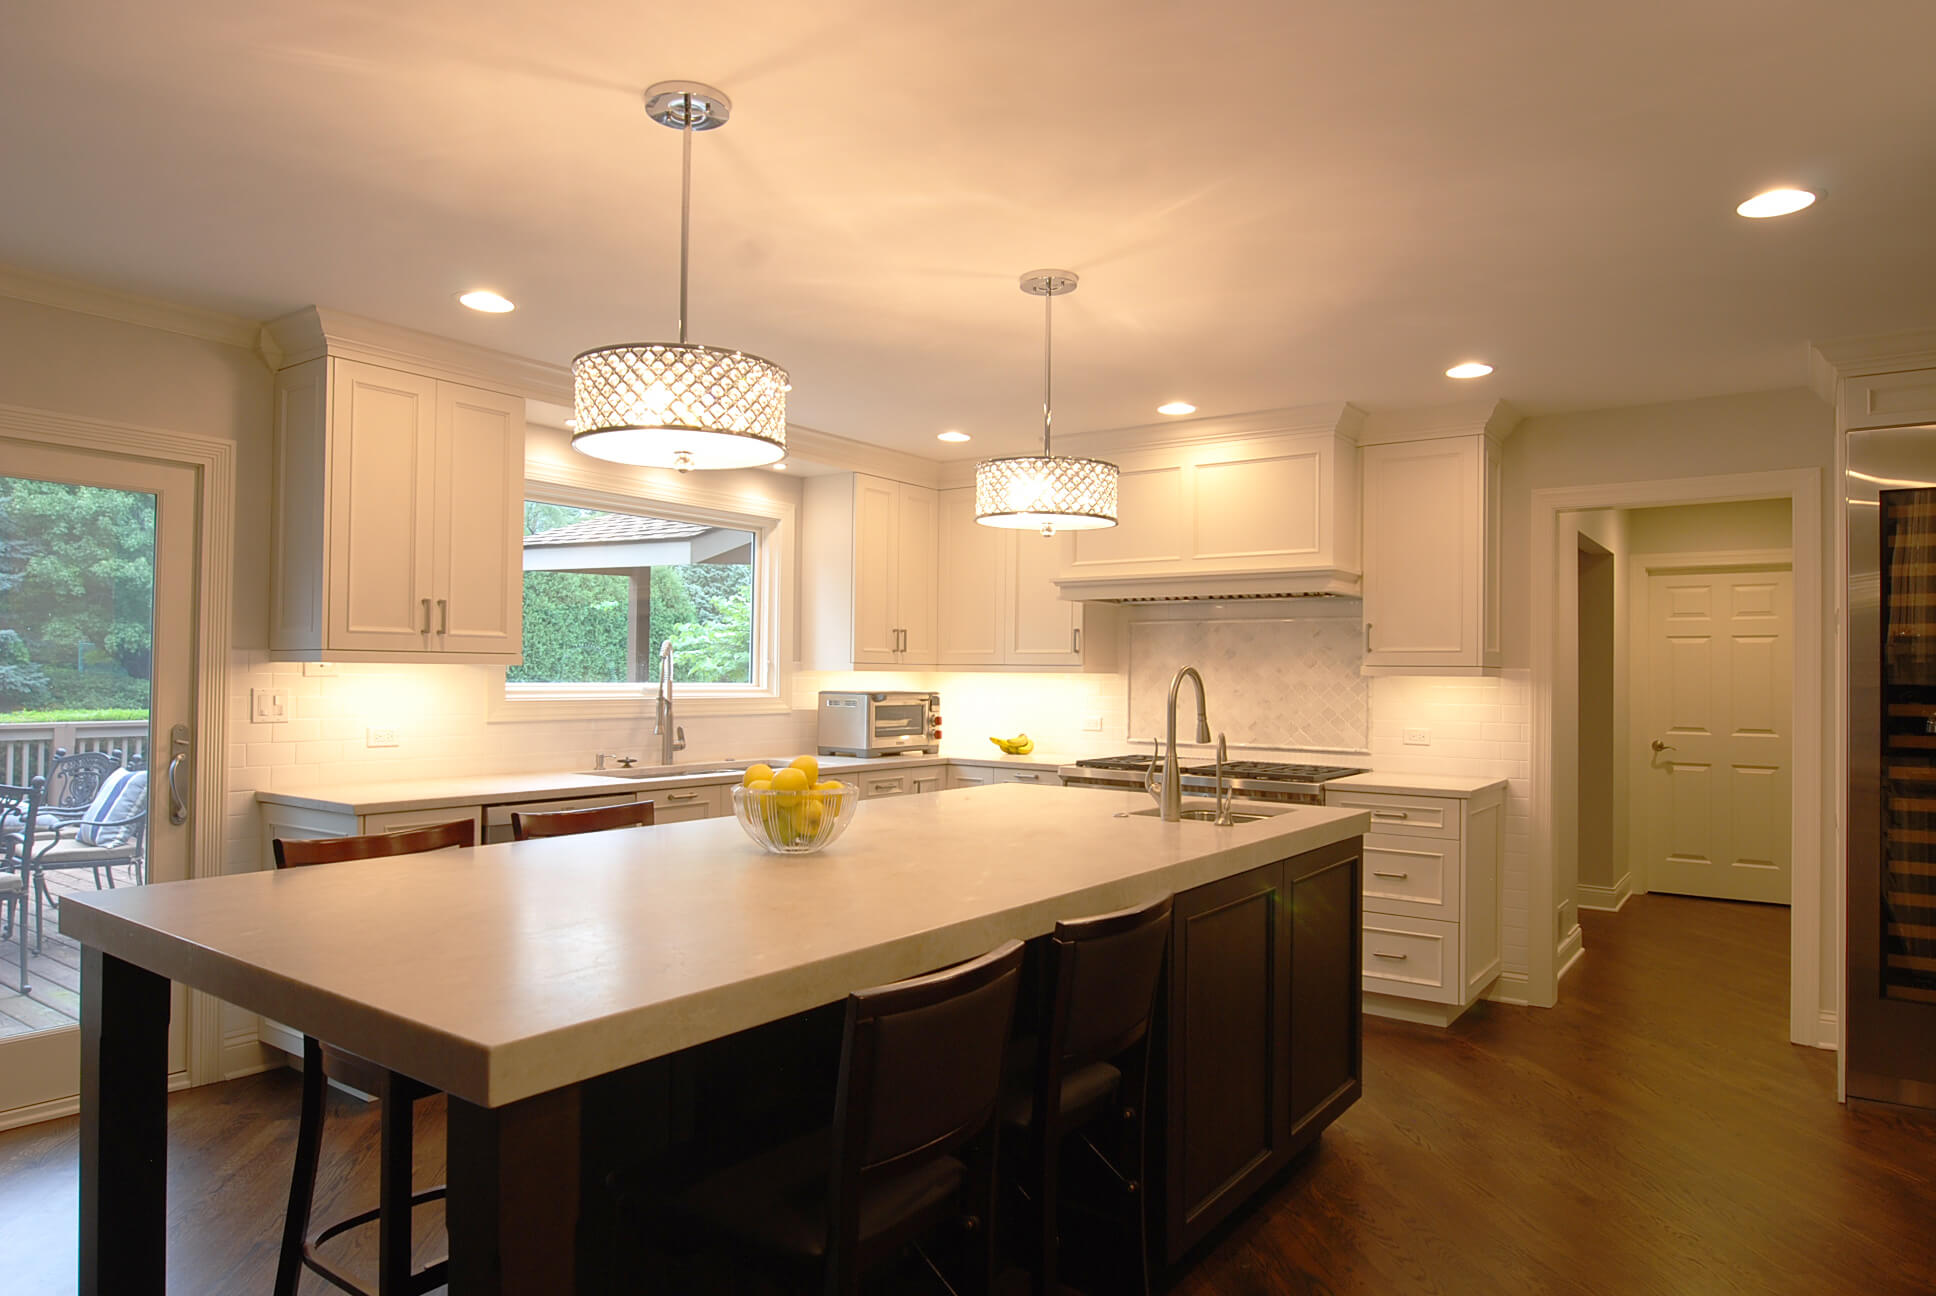 Chicago North Shore Kitchen Design Ideas | Remodeling Projects ...